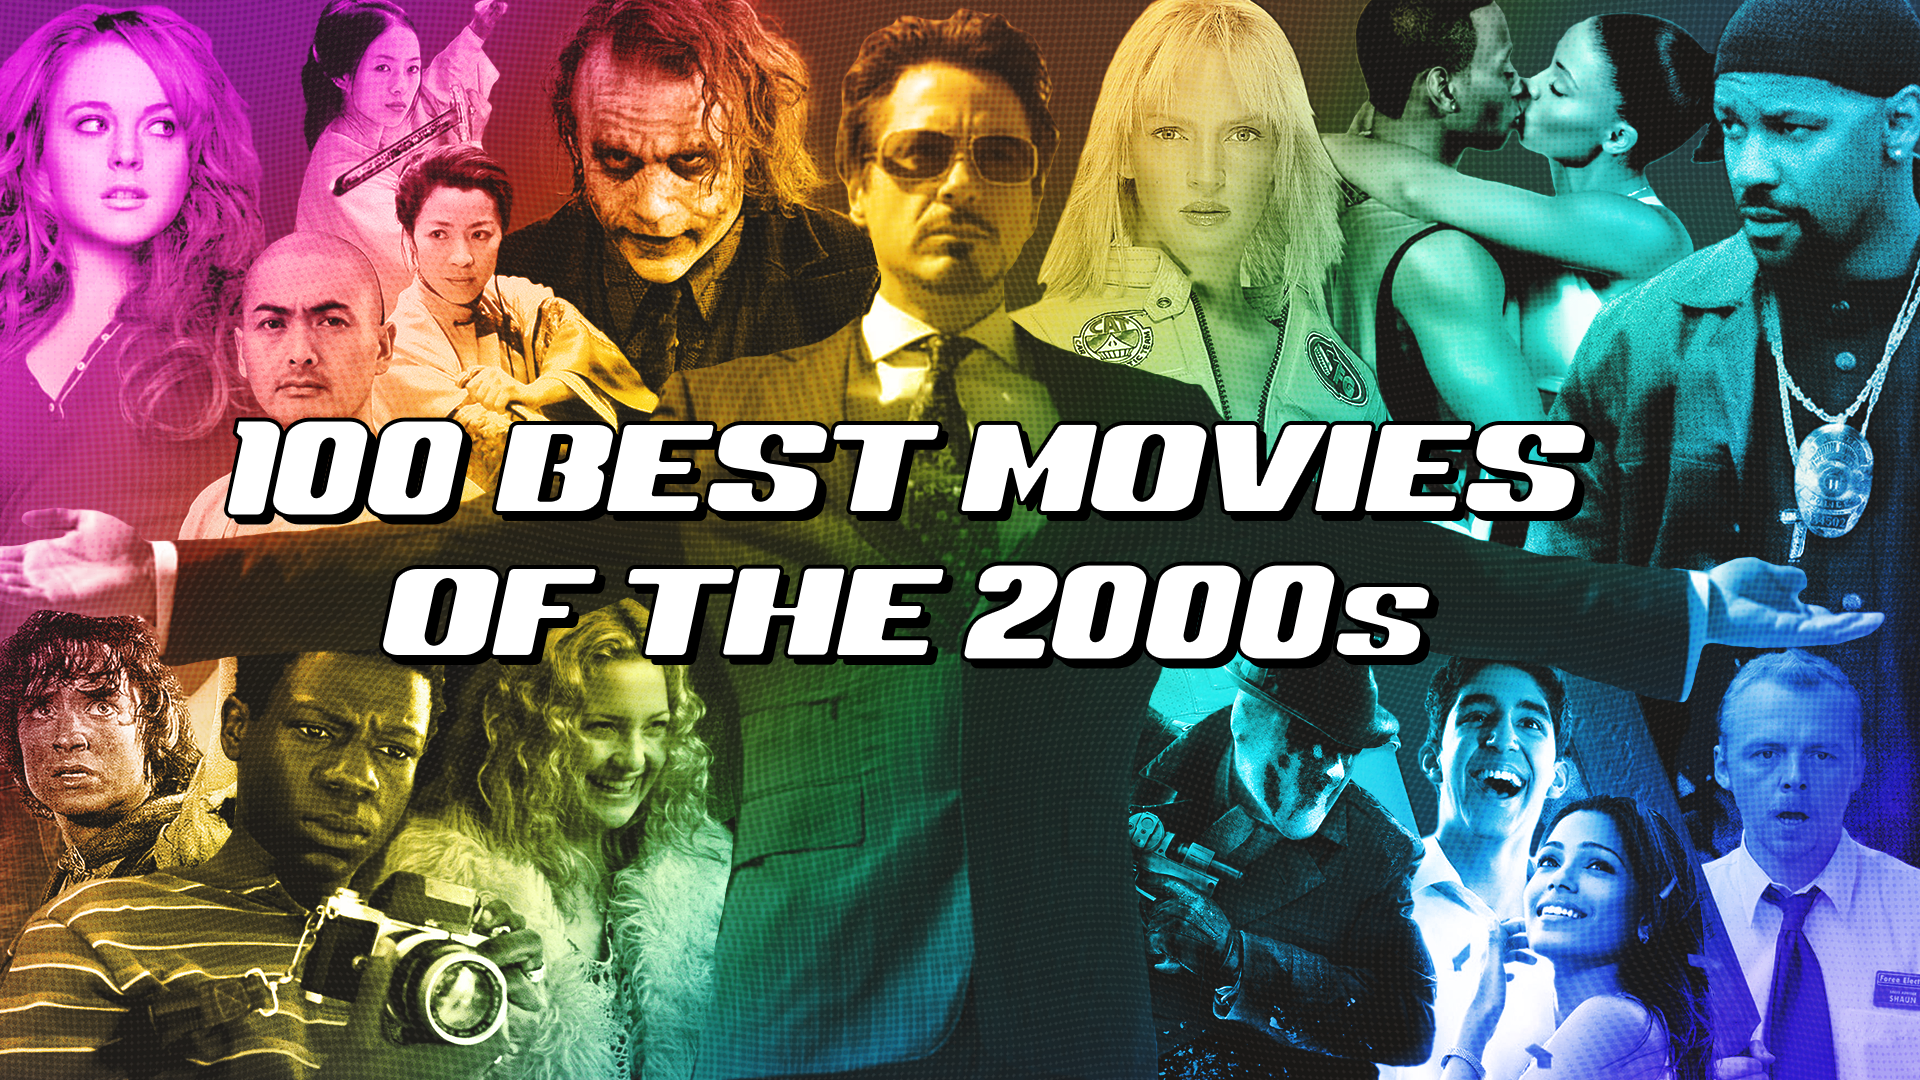 The 100 Best Movies Of The 2000s